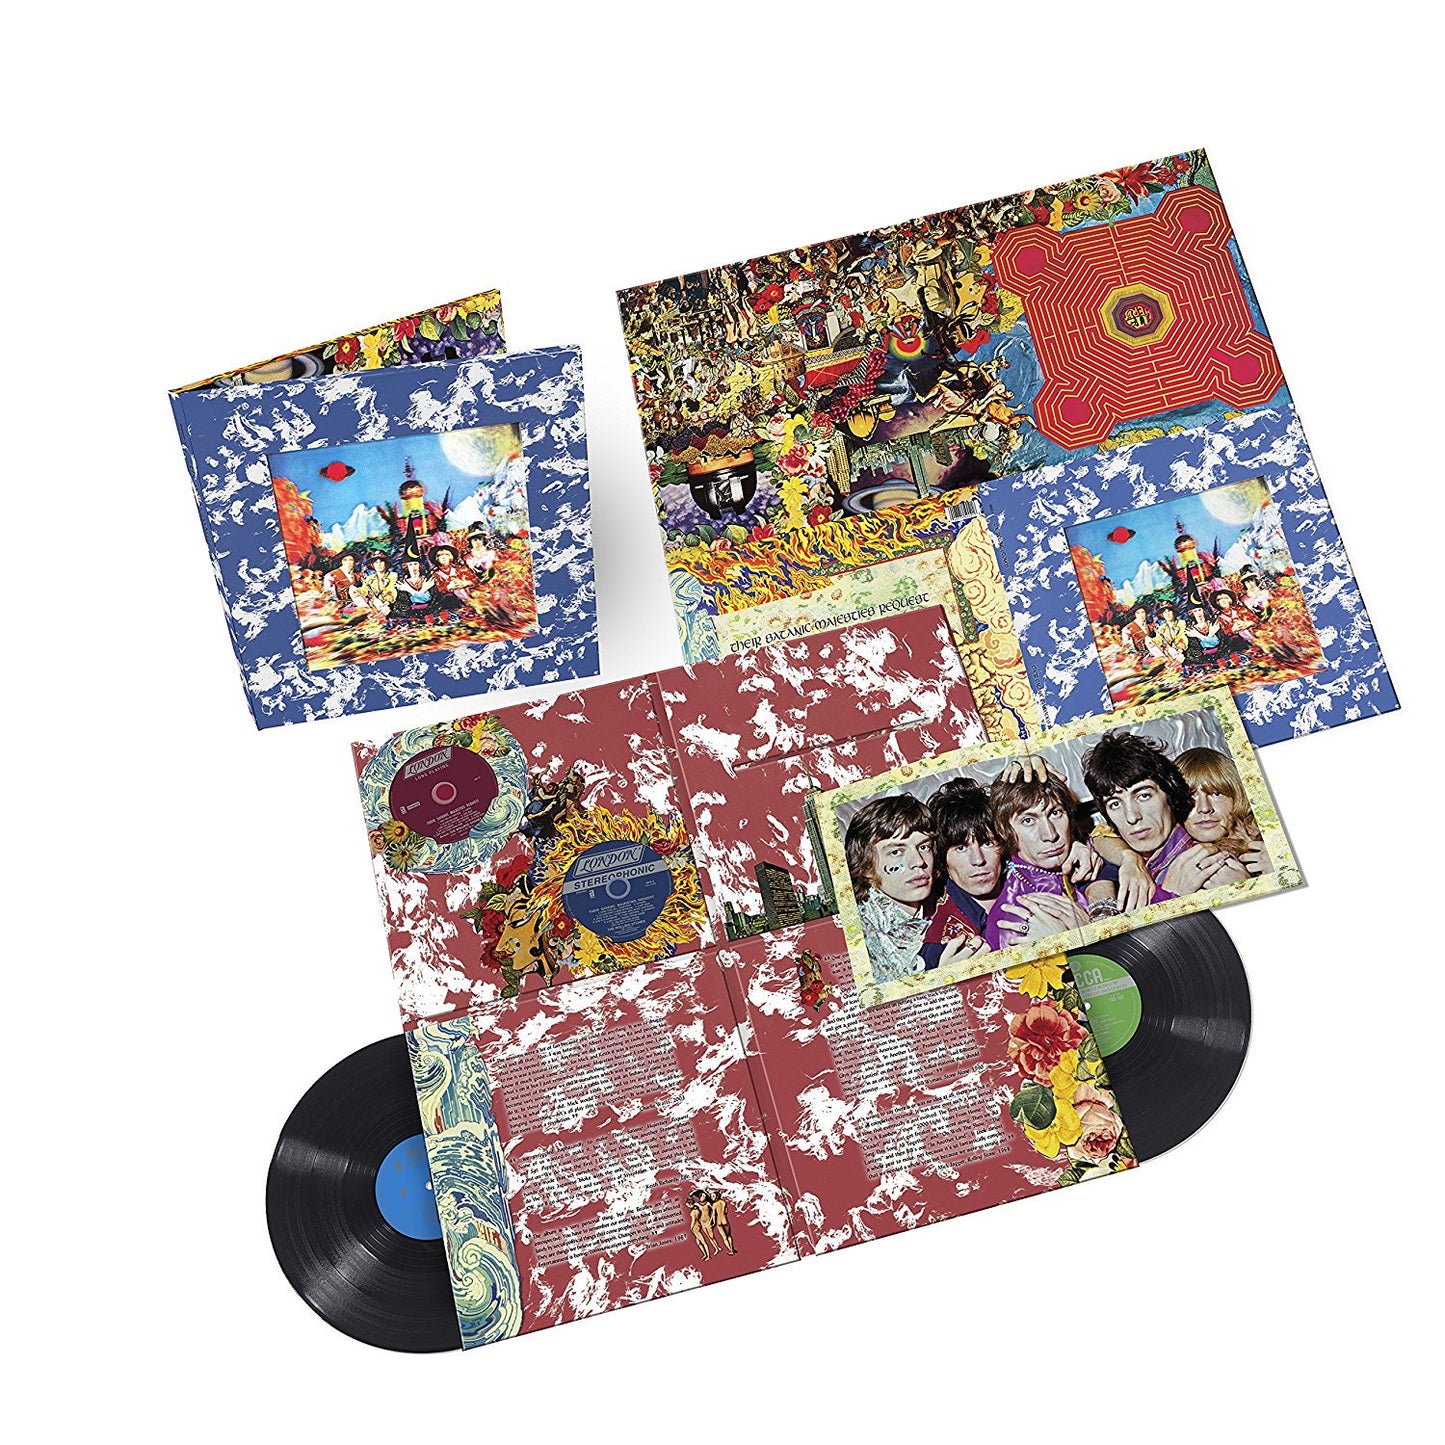 Rolling Stones - Their Satanic Majesties Request (Deluxe Edition)